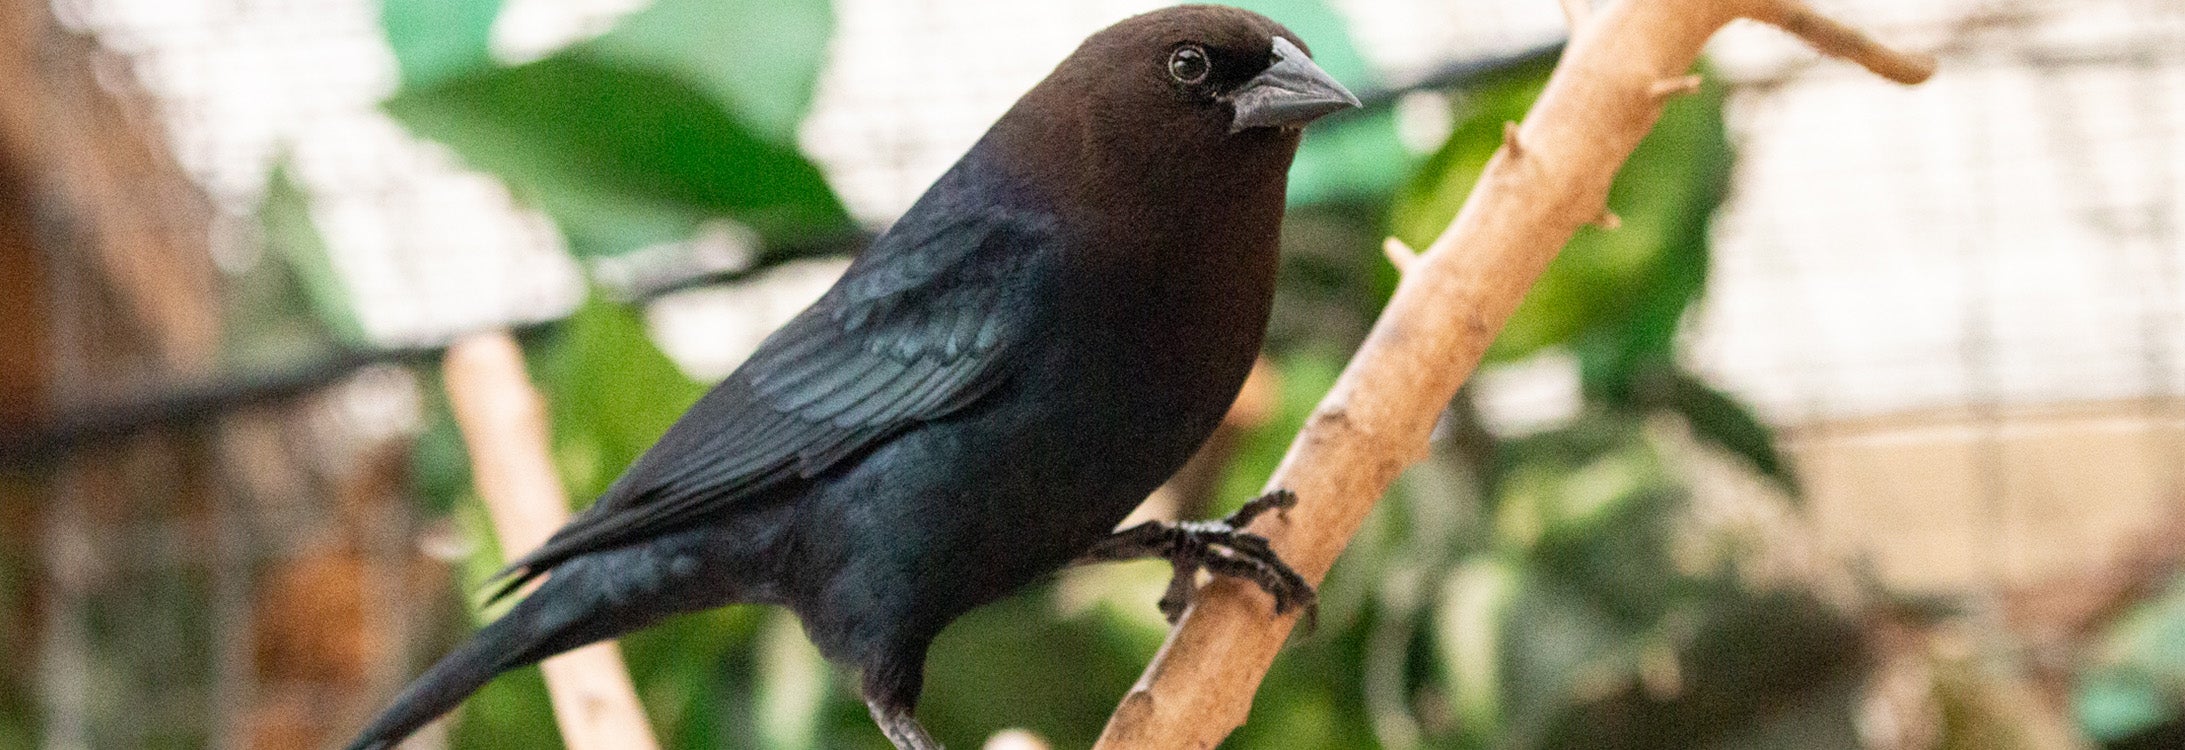 A male brown-headed cowbird surveys his surroundings at Sylvan Heights Bird Park. Cowbirds were used in a recent study by a multi-instiutional research team, including East Carolina University associate professor Chris Balakrishnan, that provided evidence that a password is used in cowbird song learning. (Submitted photos by Katie Lubbock/Sylan Heights Bird Park)